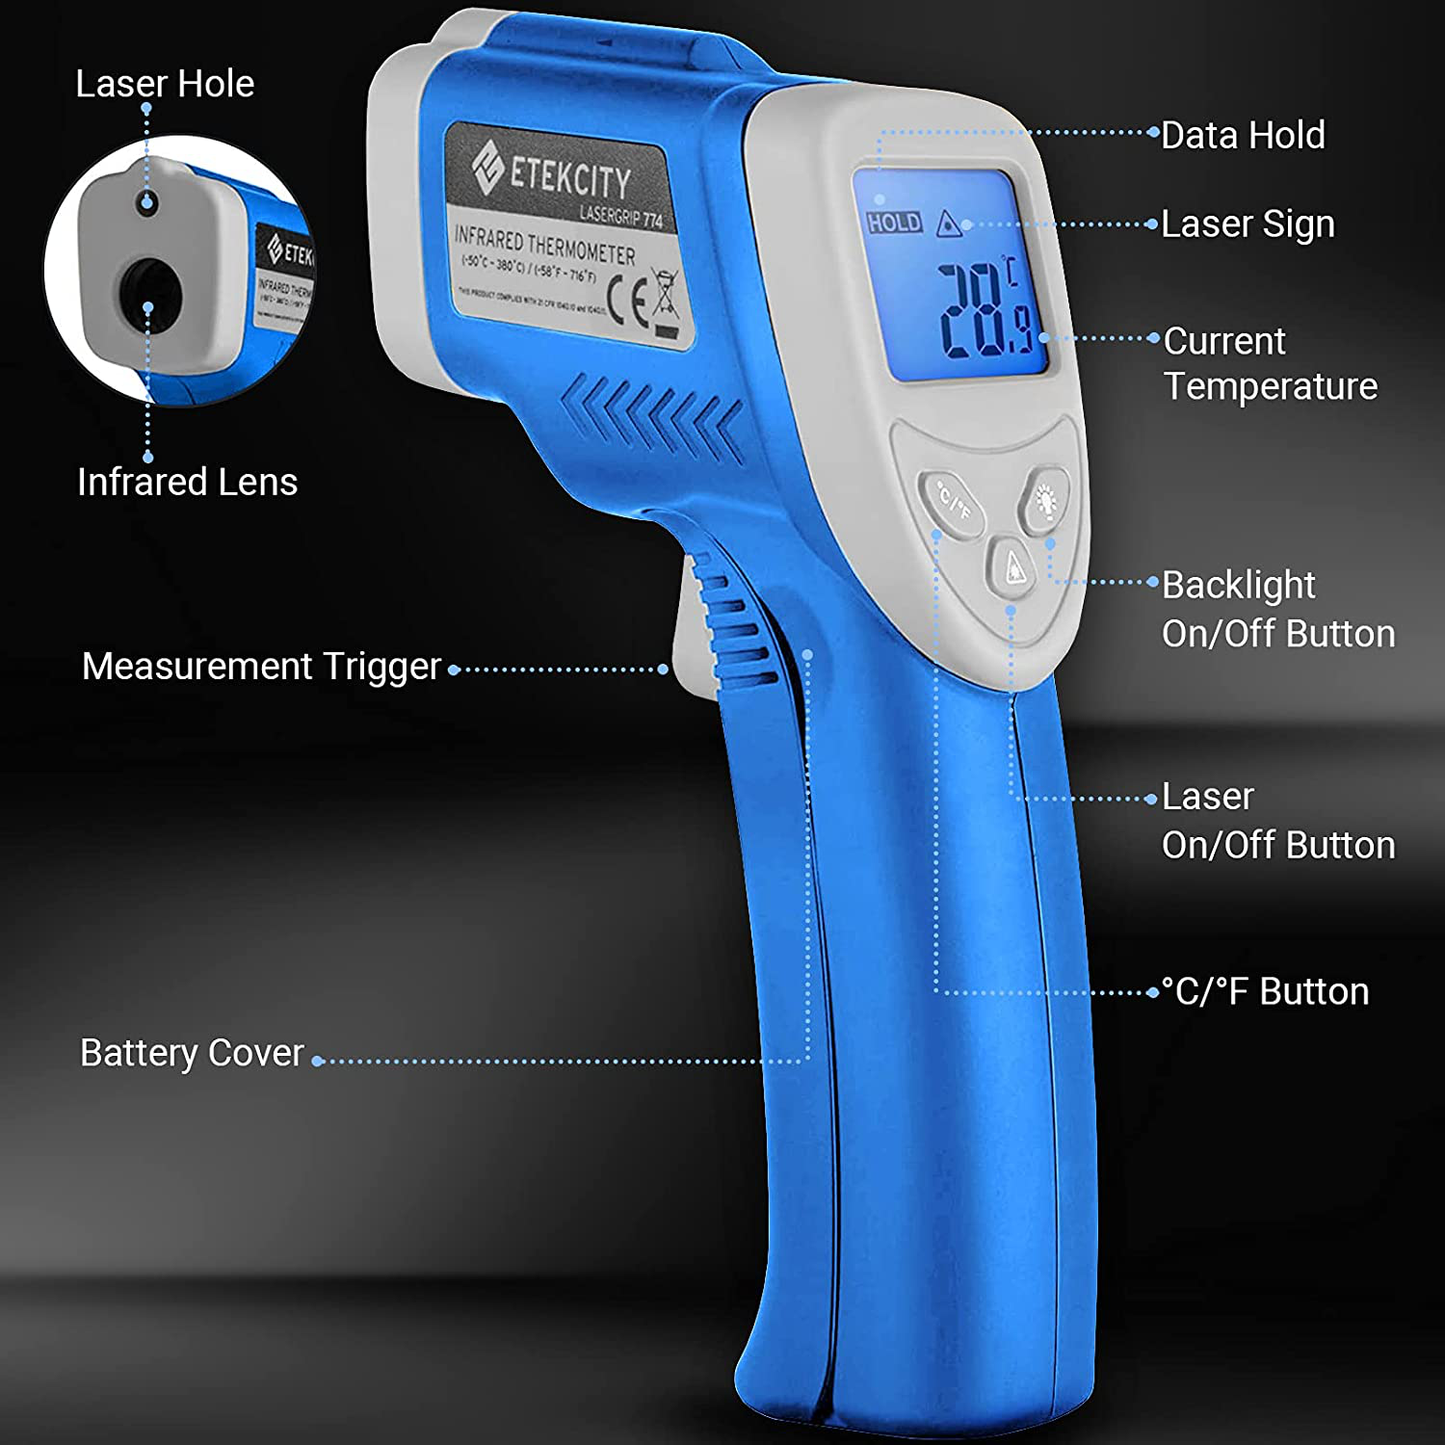 Etekcity Infrared Thermometer Lasergrip 1022 (Not for Human) Temperature Gun Non-contact -58°F ~1022°F (-50°C ~ 550°C) with Adjustable Emissivity & Max Measure for Meat Refrigerator Pool Oven, Yellow